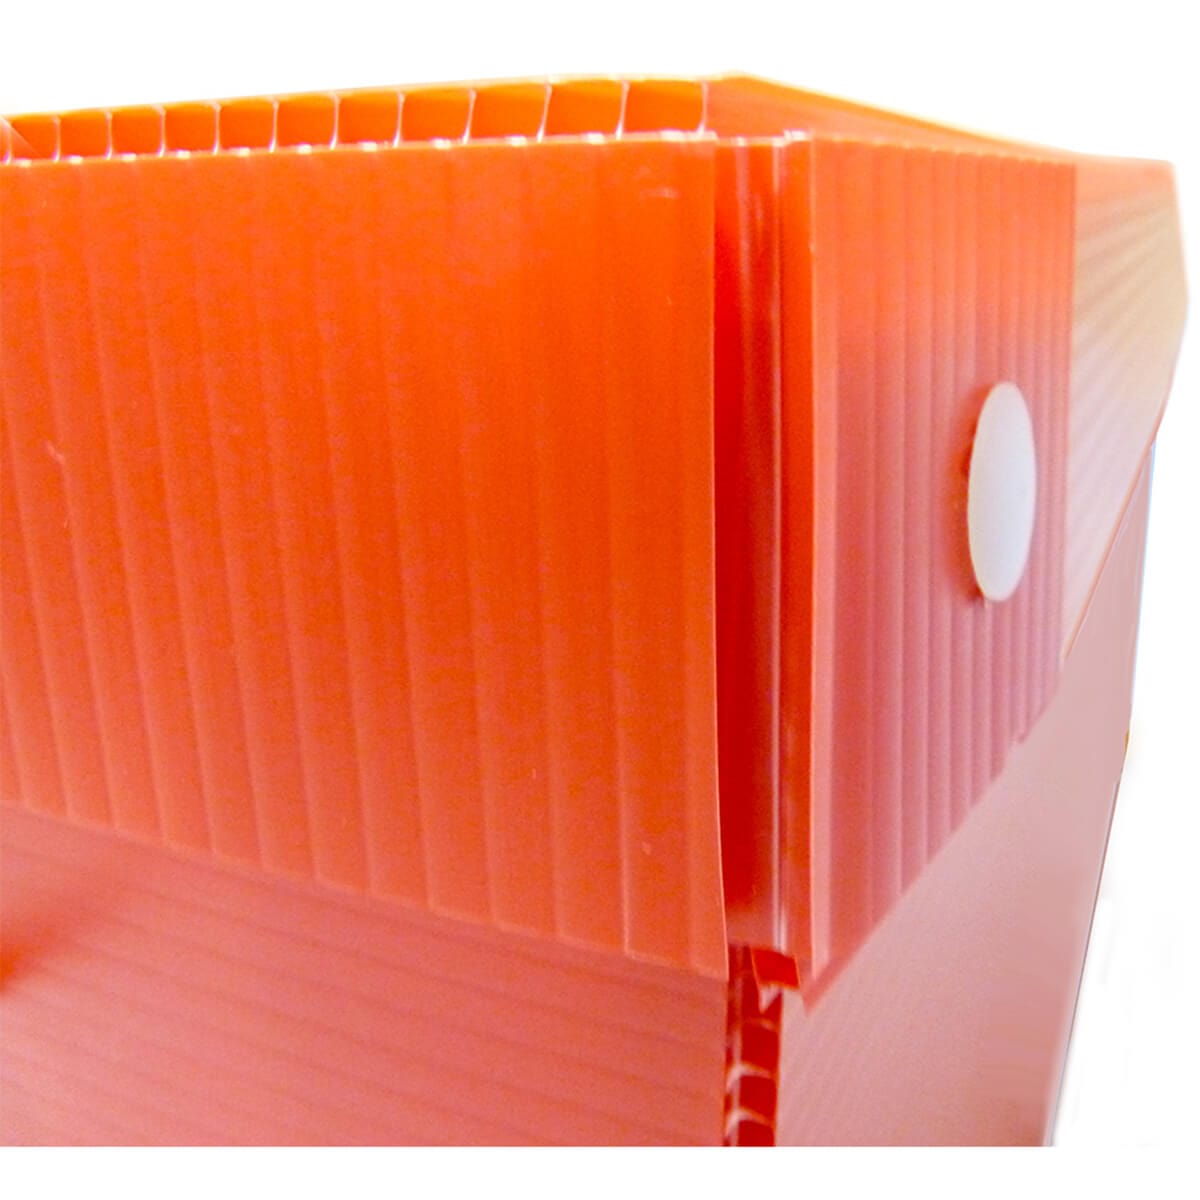 close up of an orange storage bin and cover for use with a stand and C&C guinea pig cage